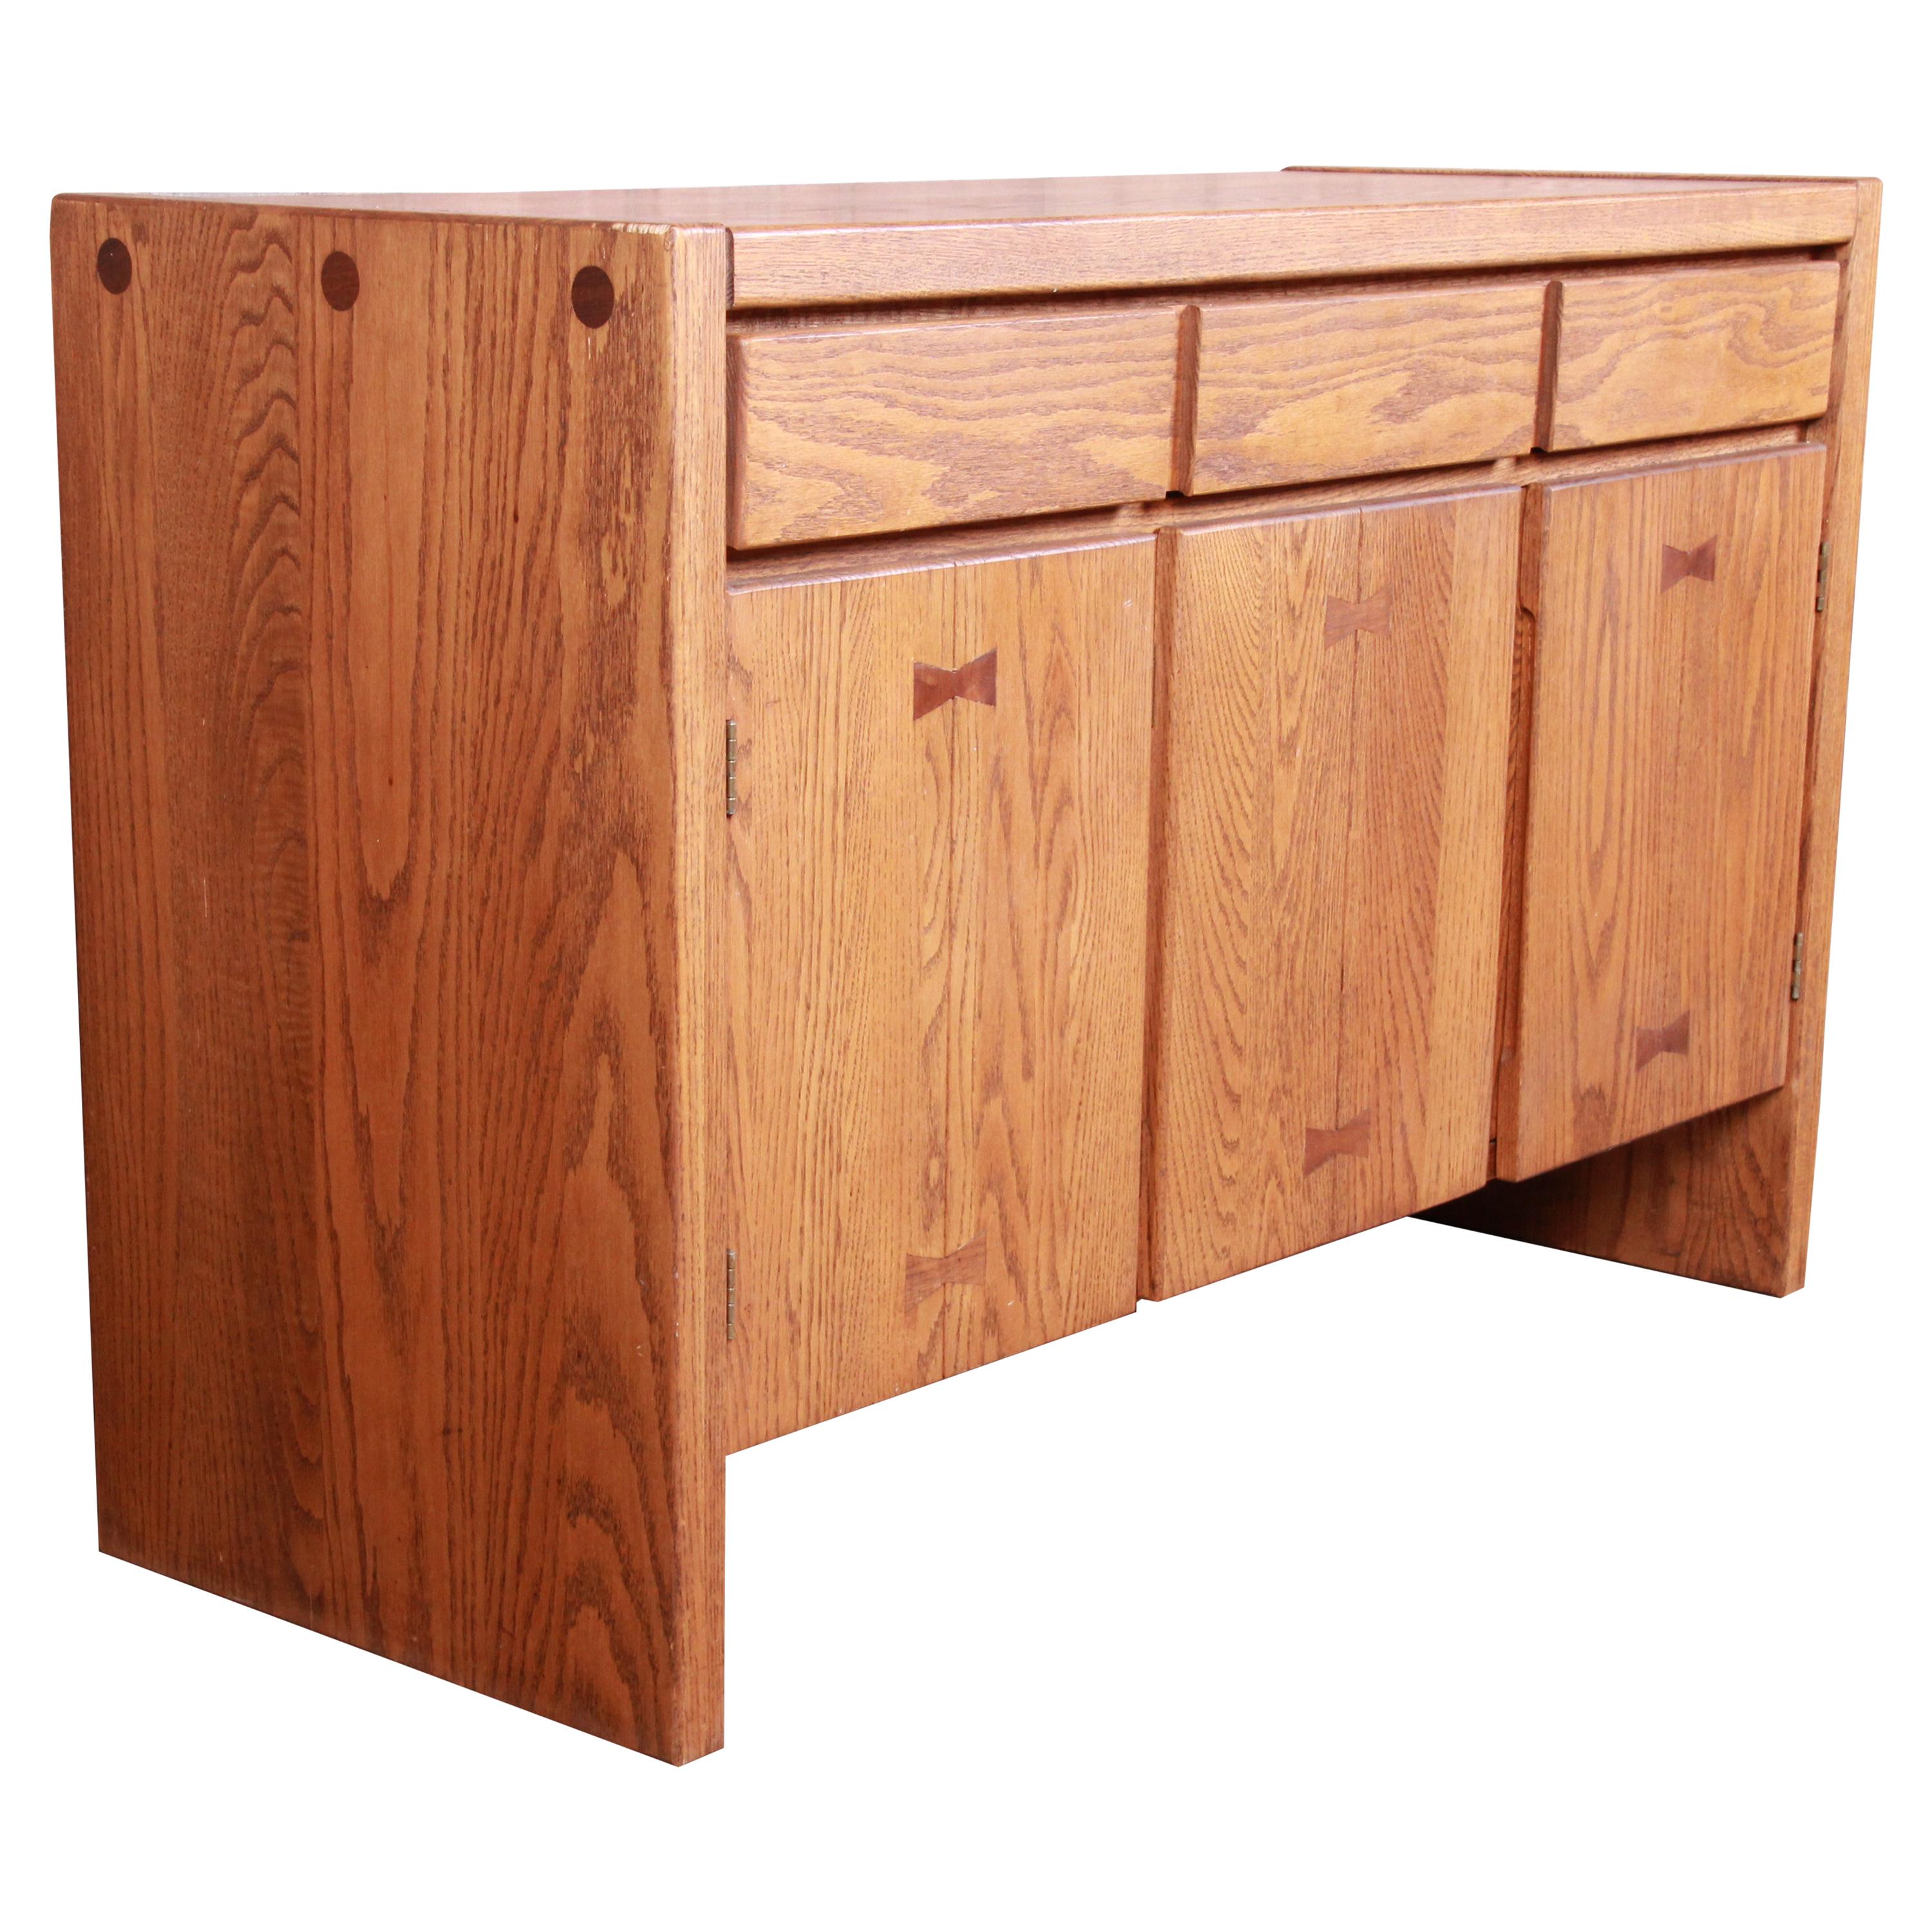 Russel Wright for Conant Ball Mid-Century Modern Oak Sideboard Credenza